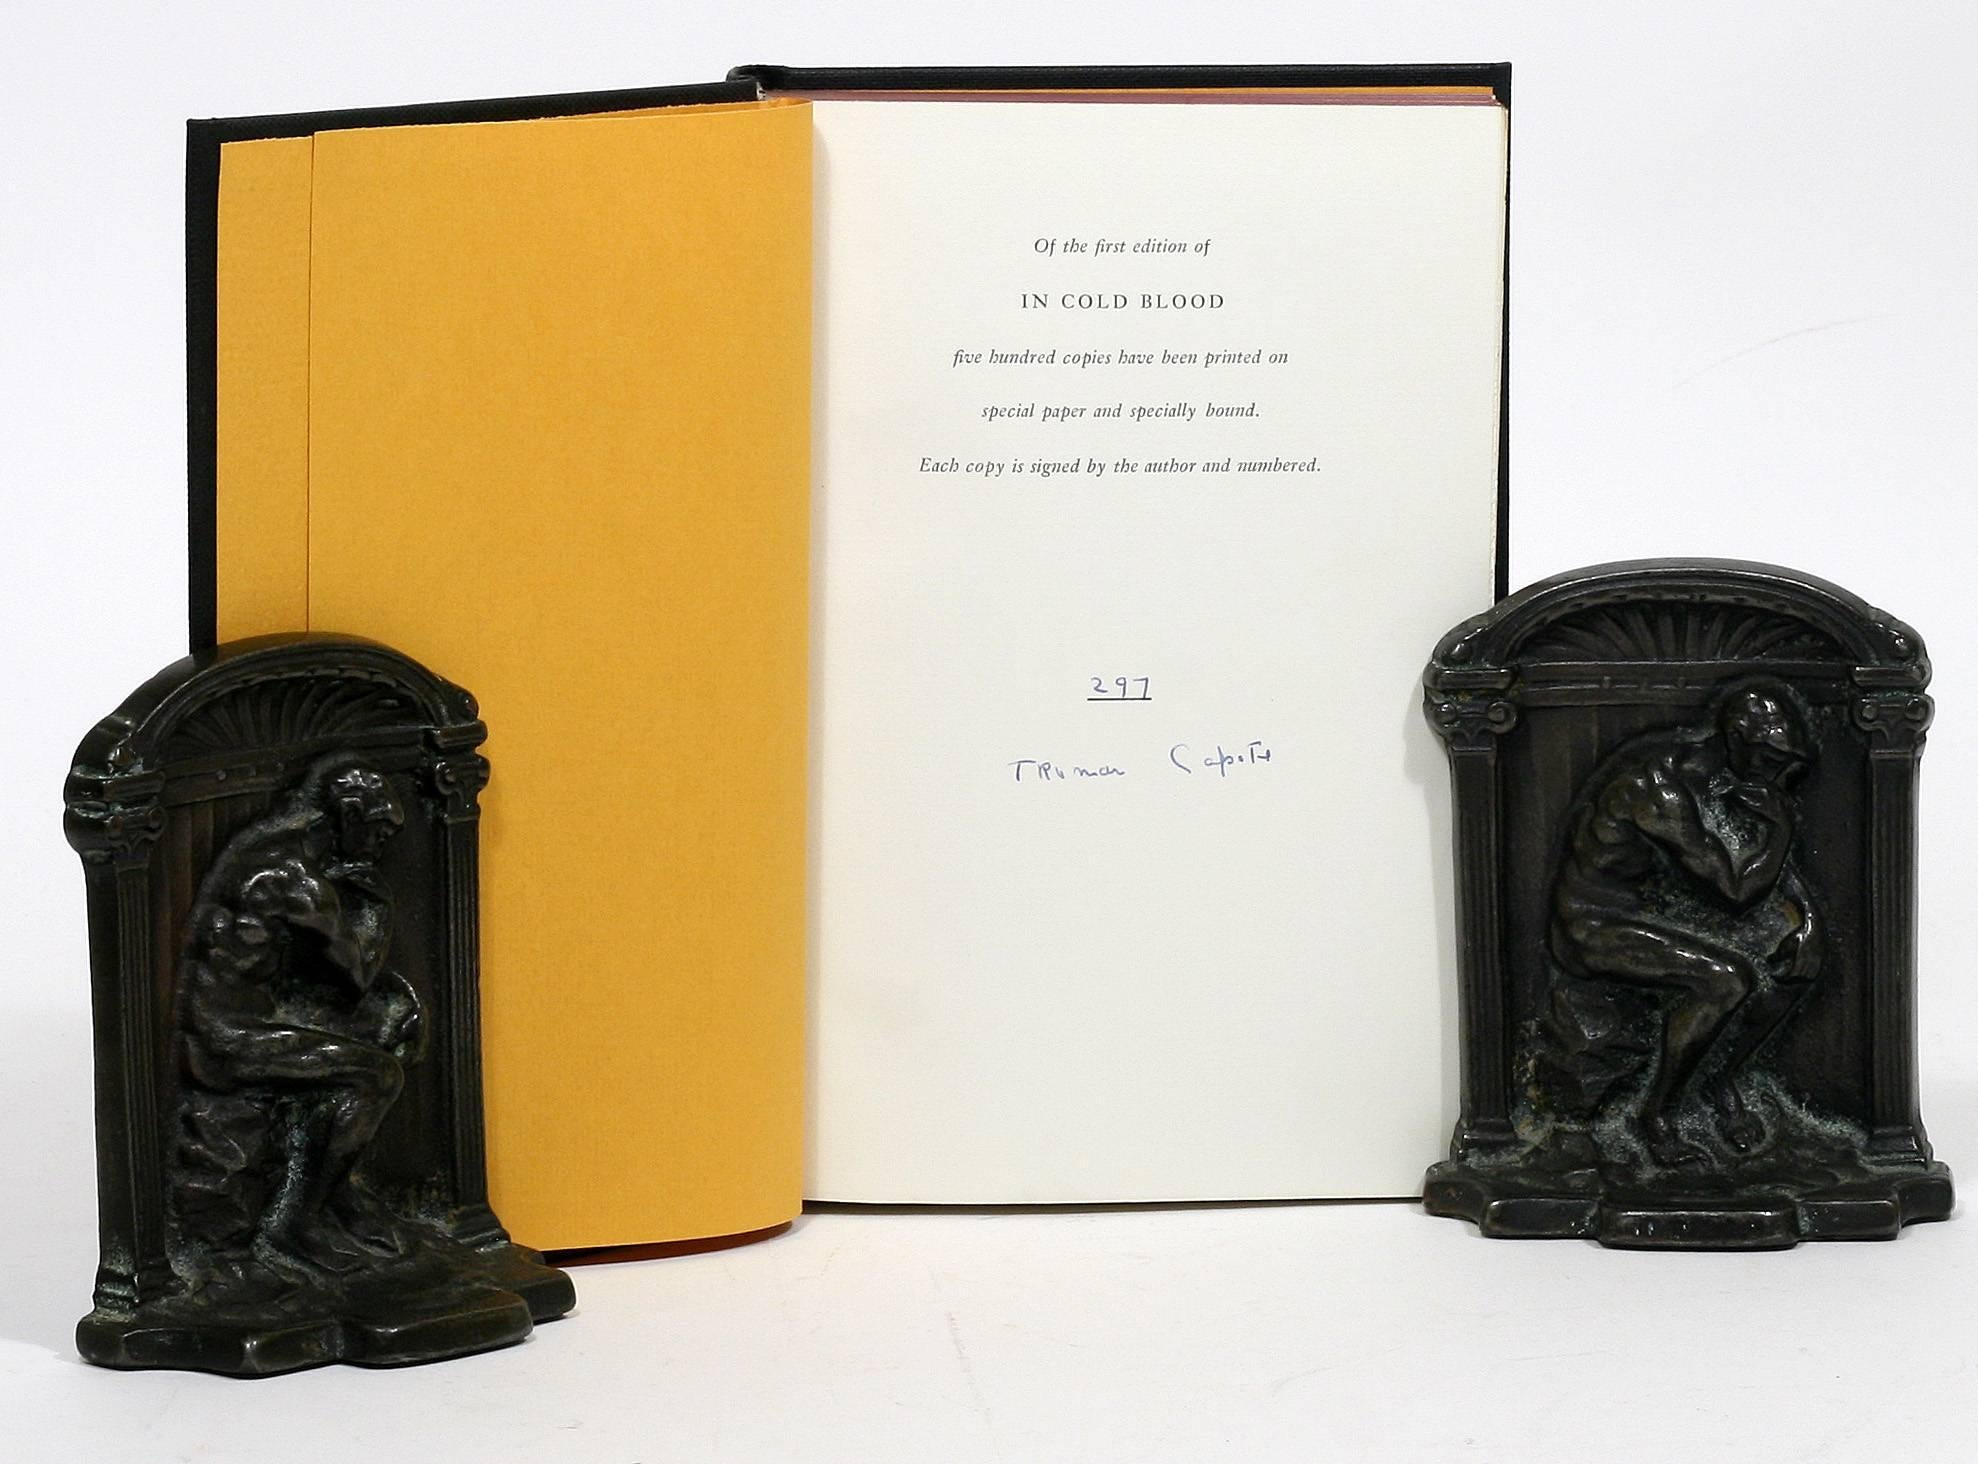 Signed limited first edition of Capote's masterpiece, one of only 500 copies signed by Capote.

